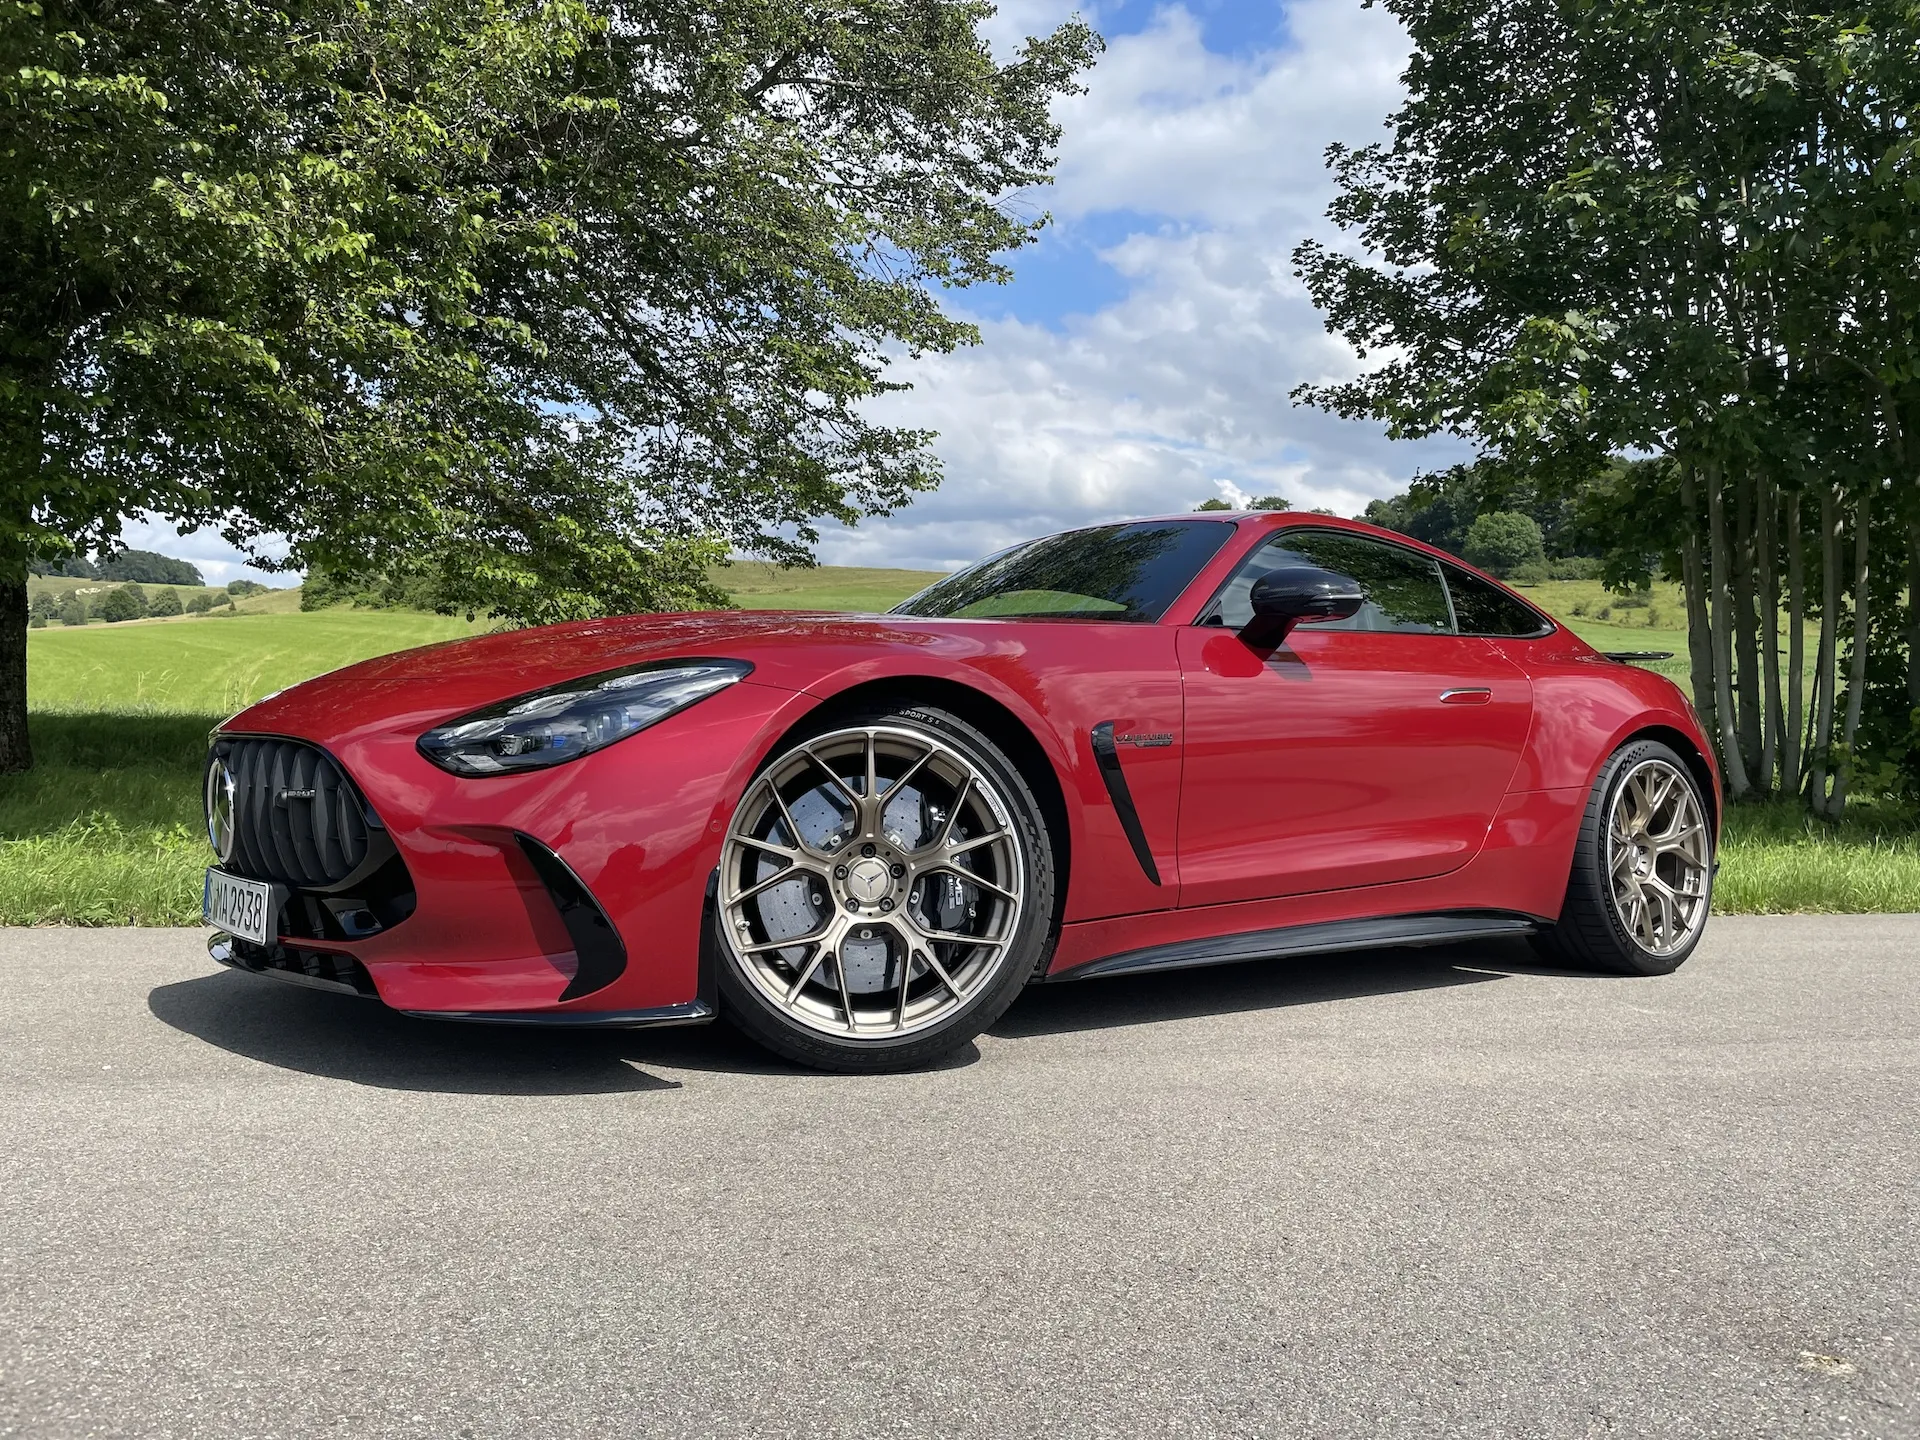 2025 Mercedes-Benz AMG GT 63 S E Performance invests heavily in speed